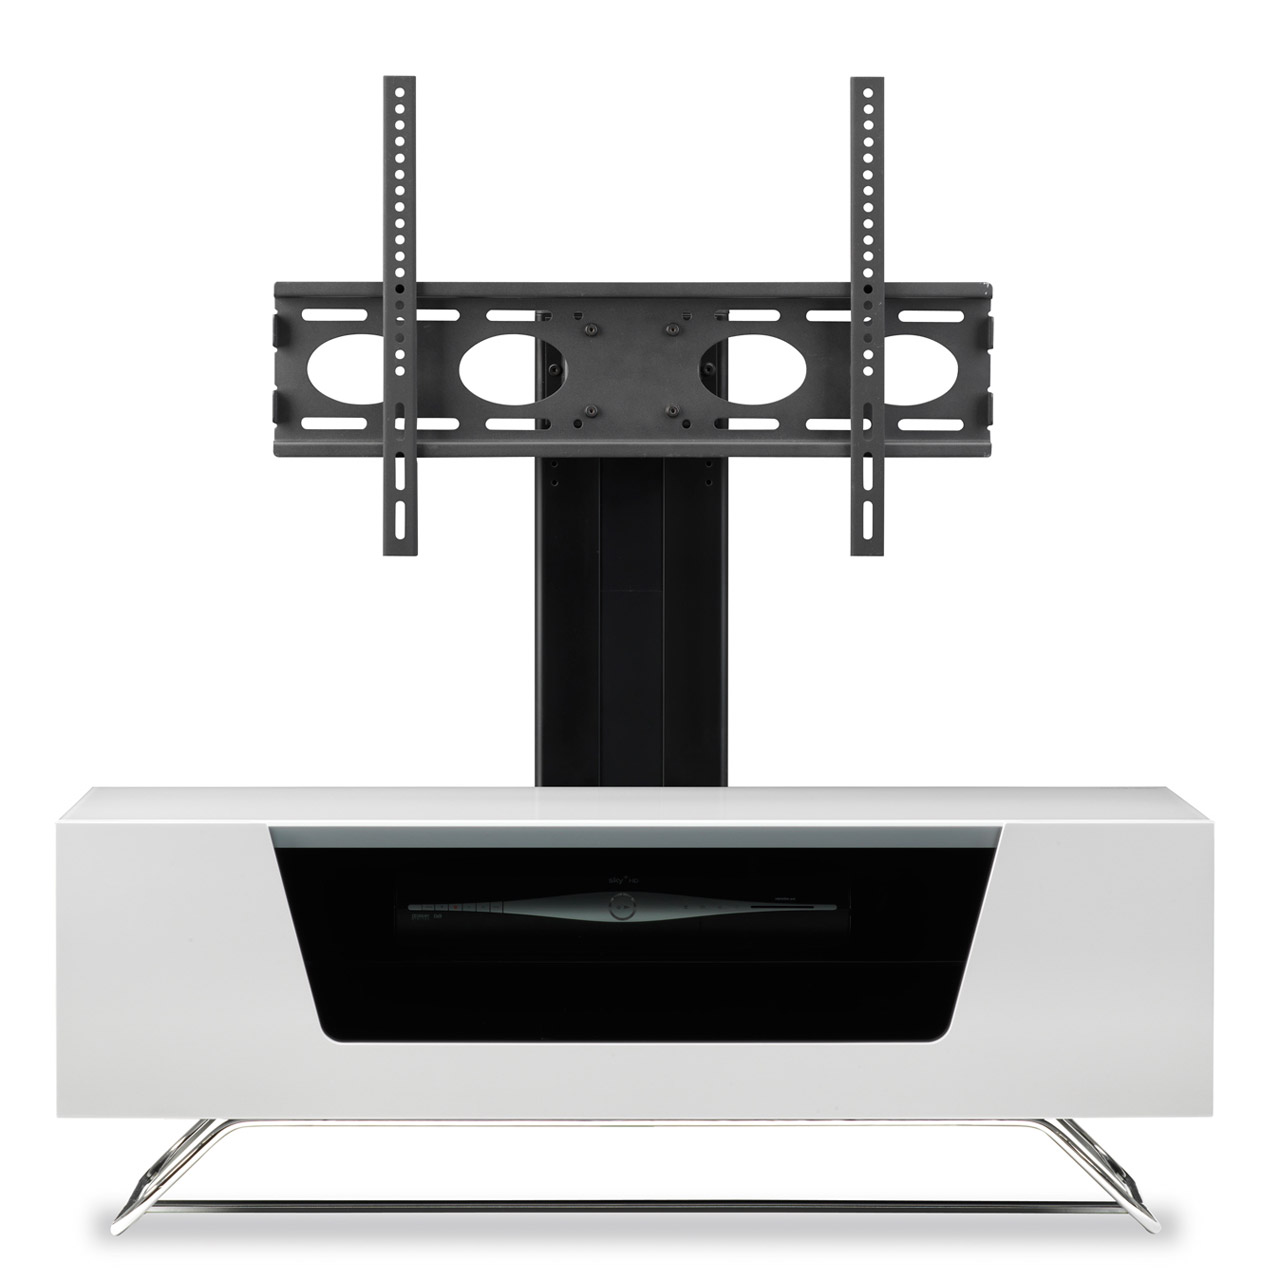 Image of Alphason CRO21000BKWH Chromium 2 Cantilever TV Cabinet 1000mm Wide in